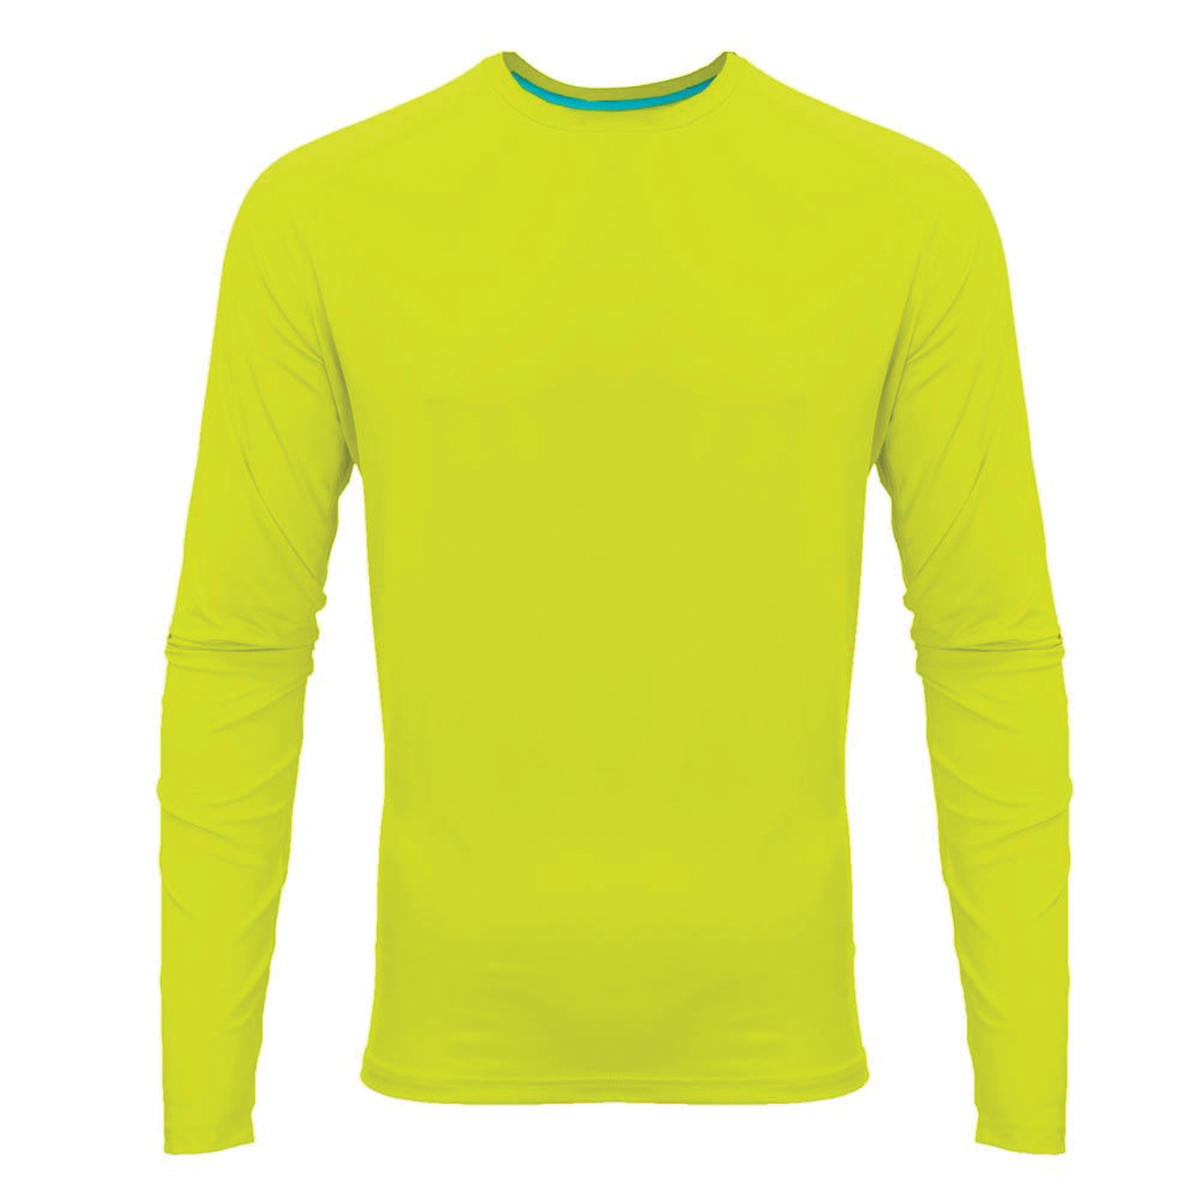 Mobile Cooling Series MCMT05100421 Shirt, L, Polyester/Spandex, Crew Neck, Long, Raglan Sleeve, Athletic